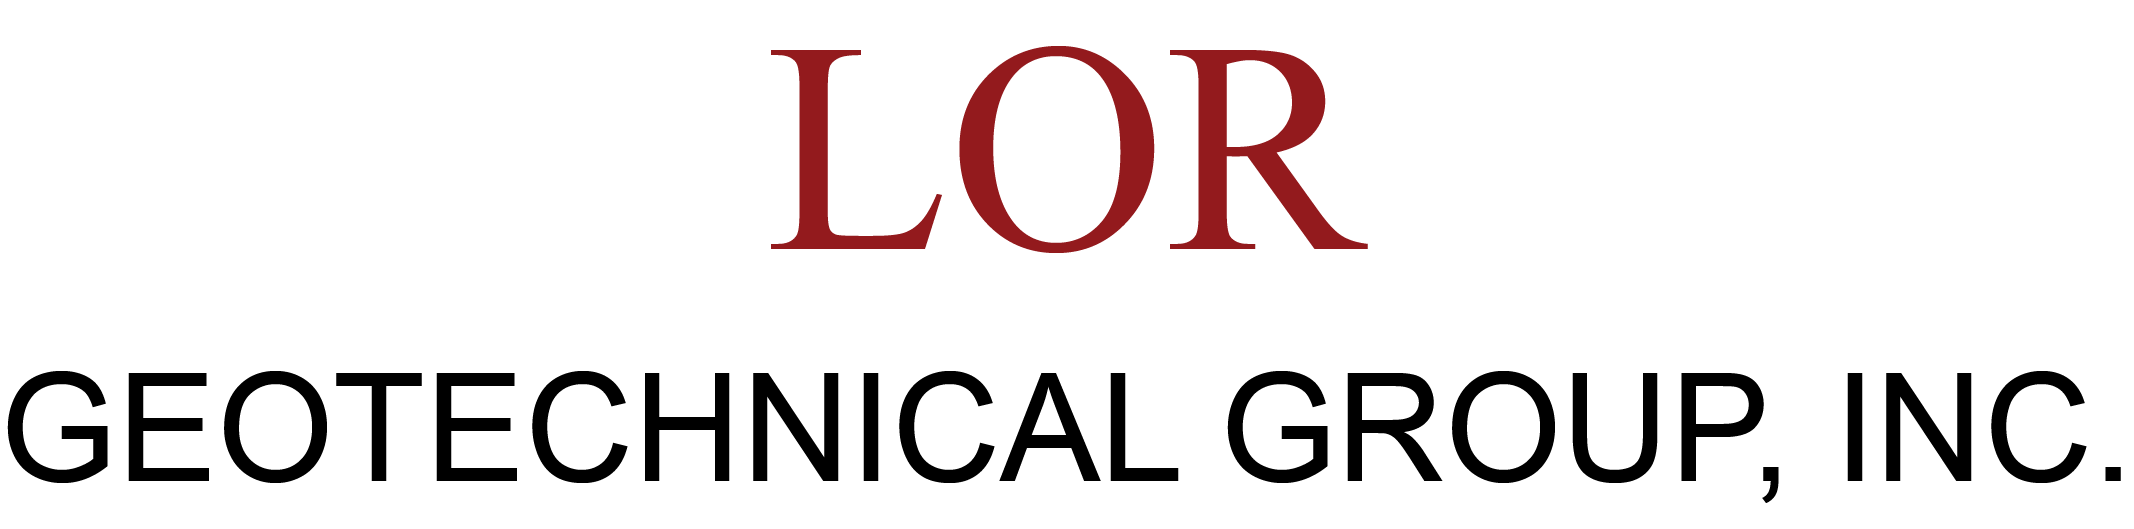 LOR Geotechnical Group Inc.